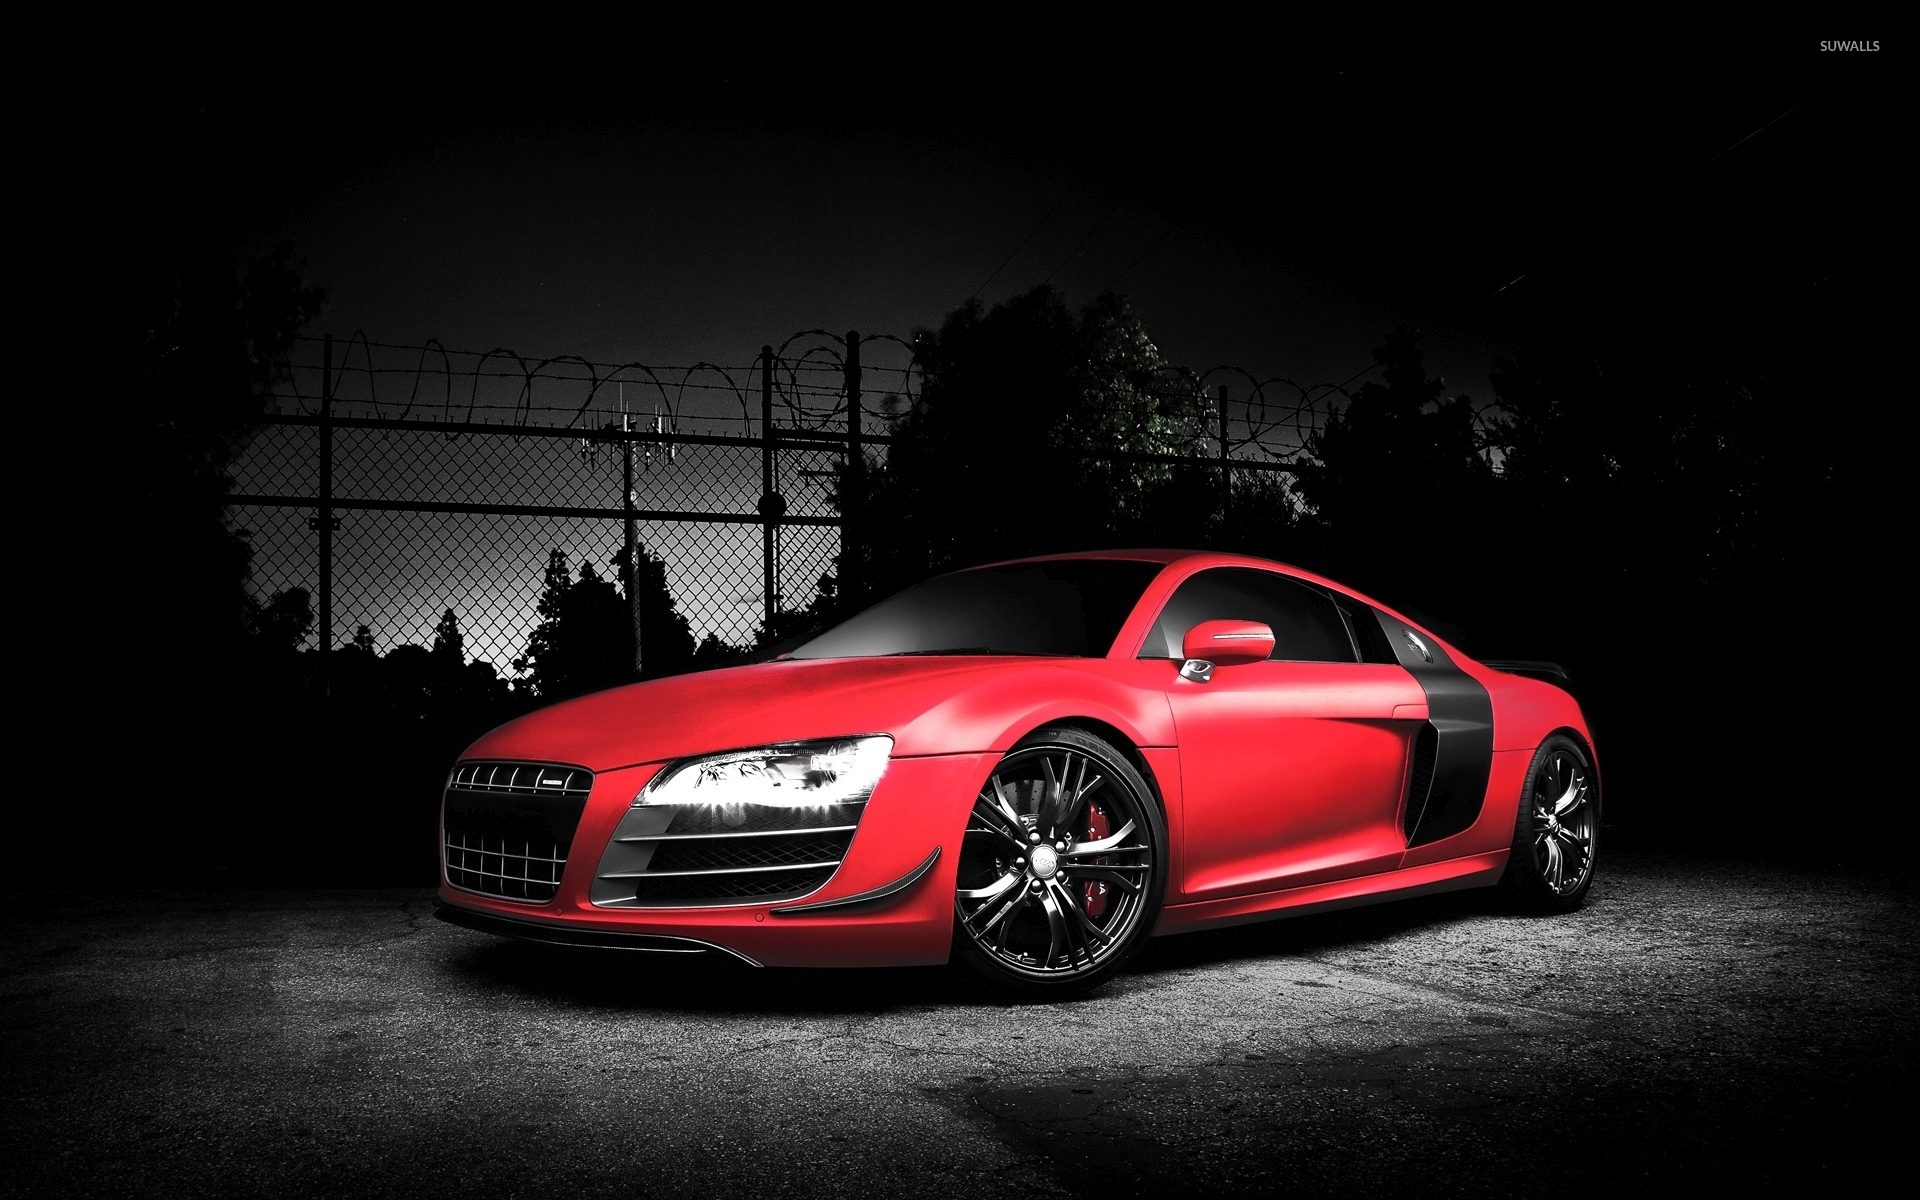 Red Audi R8 by a fence wallpaper - Car